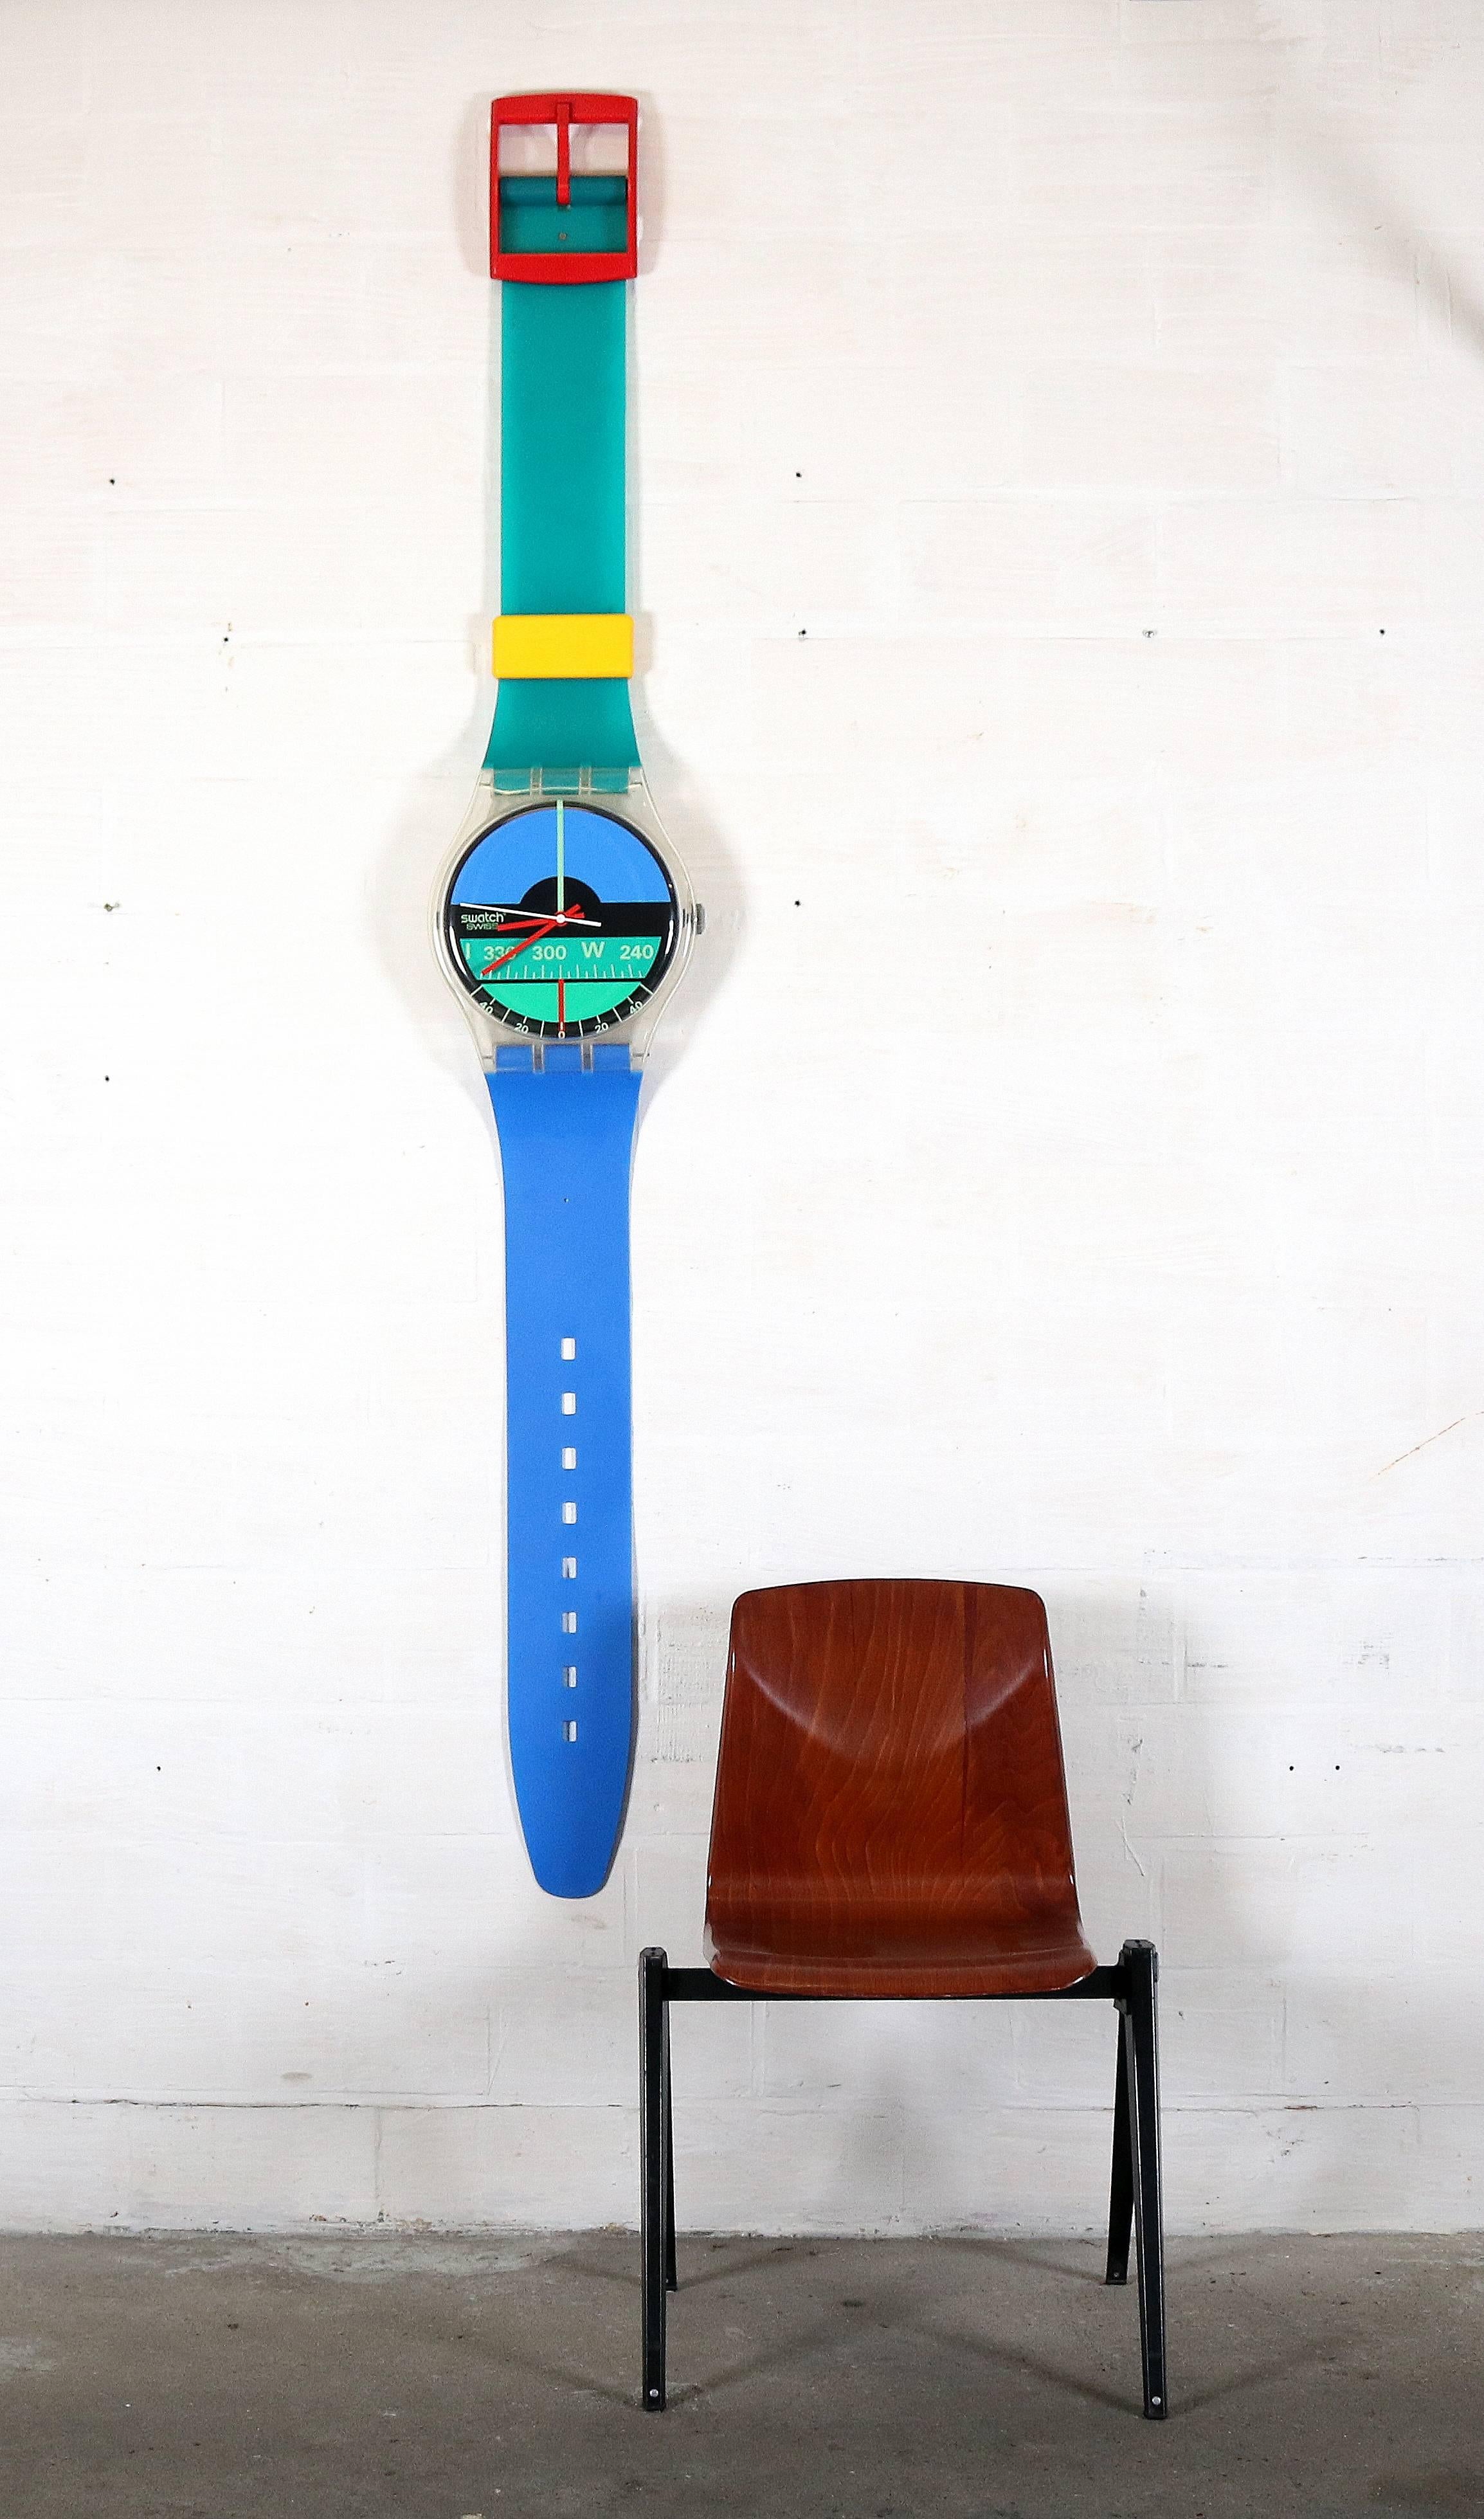 Big clock of the watch brand Swatch.
This watch of the Nautilus Aqua Love collection was made in 1987.
In a good vintage condition.